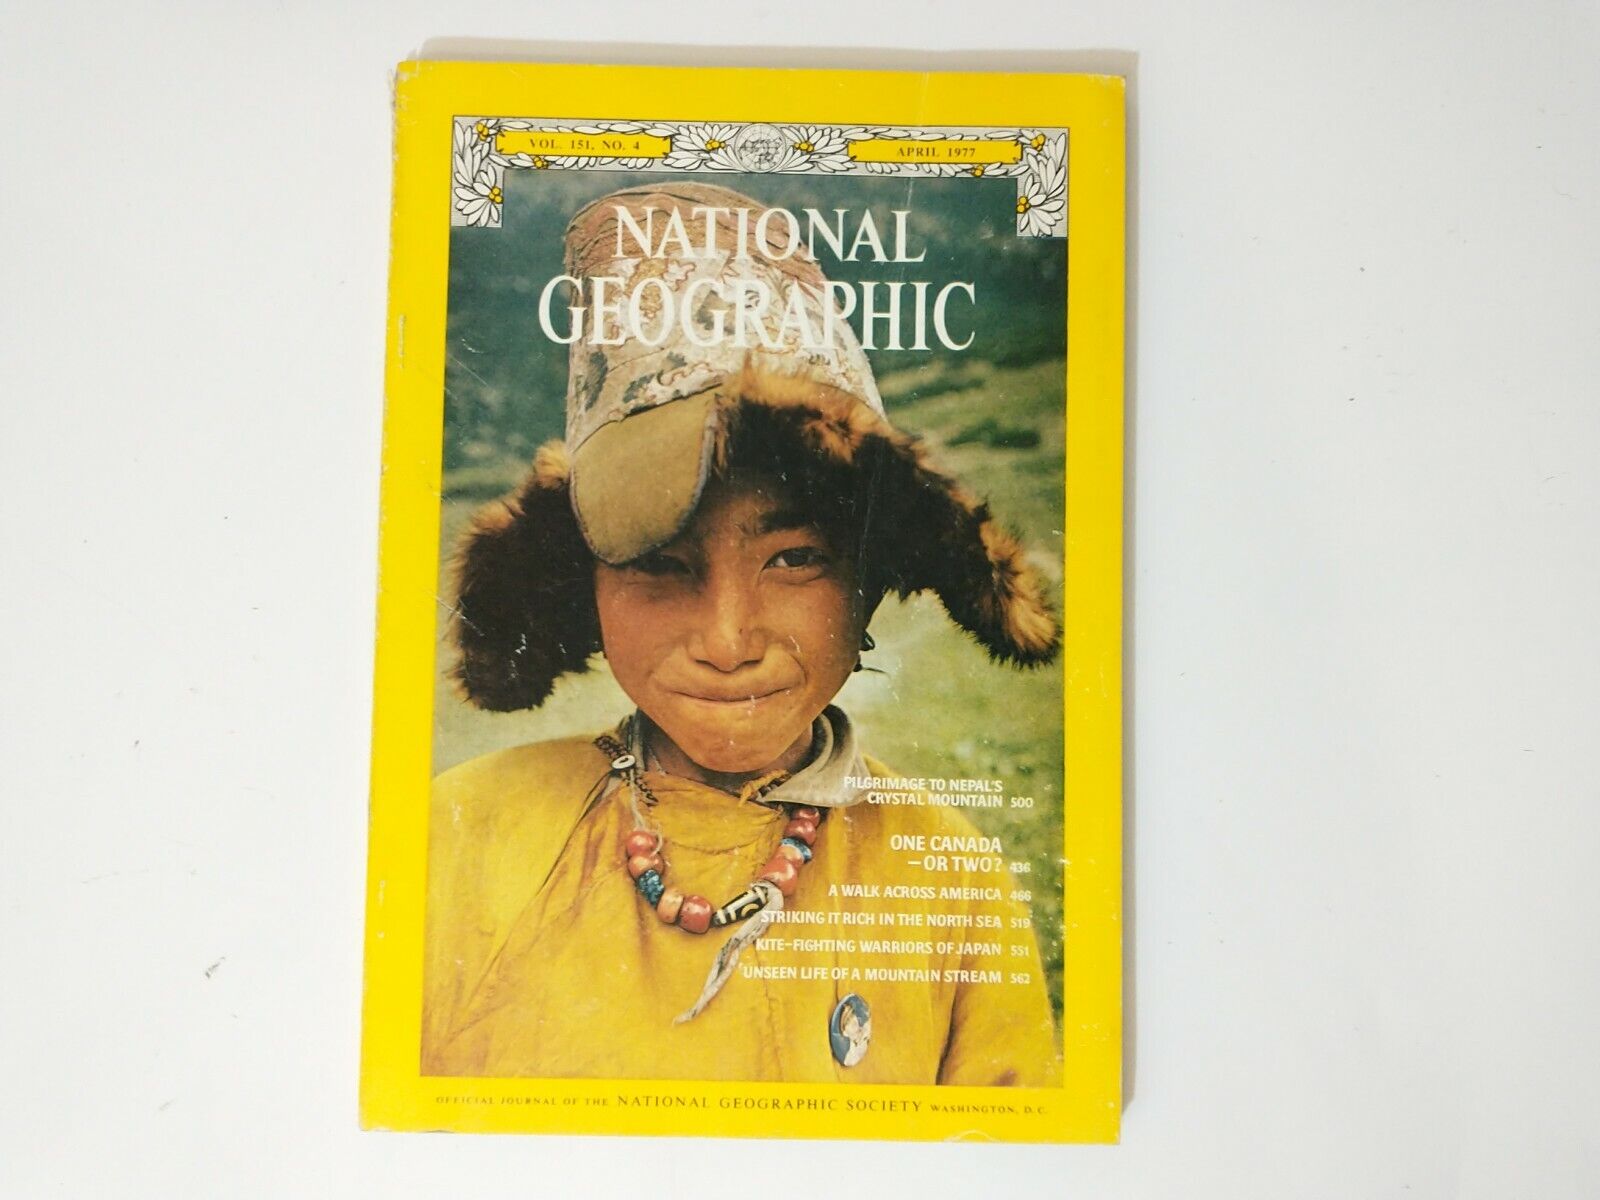 National Geographic Magazine VTG Back Issue April 1977 Quebec America By Foot